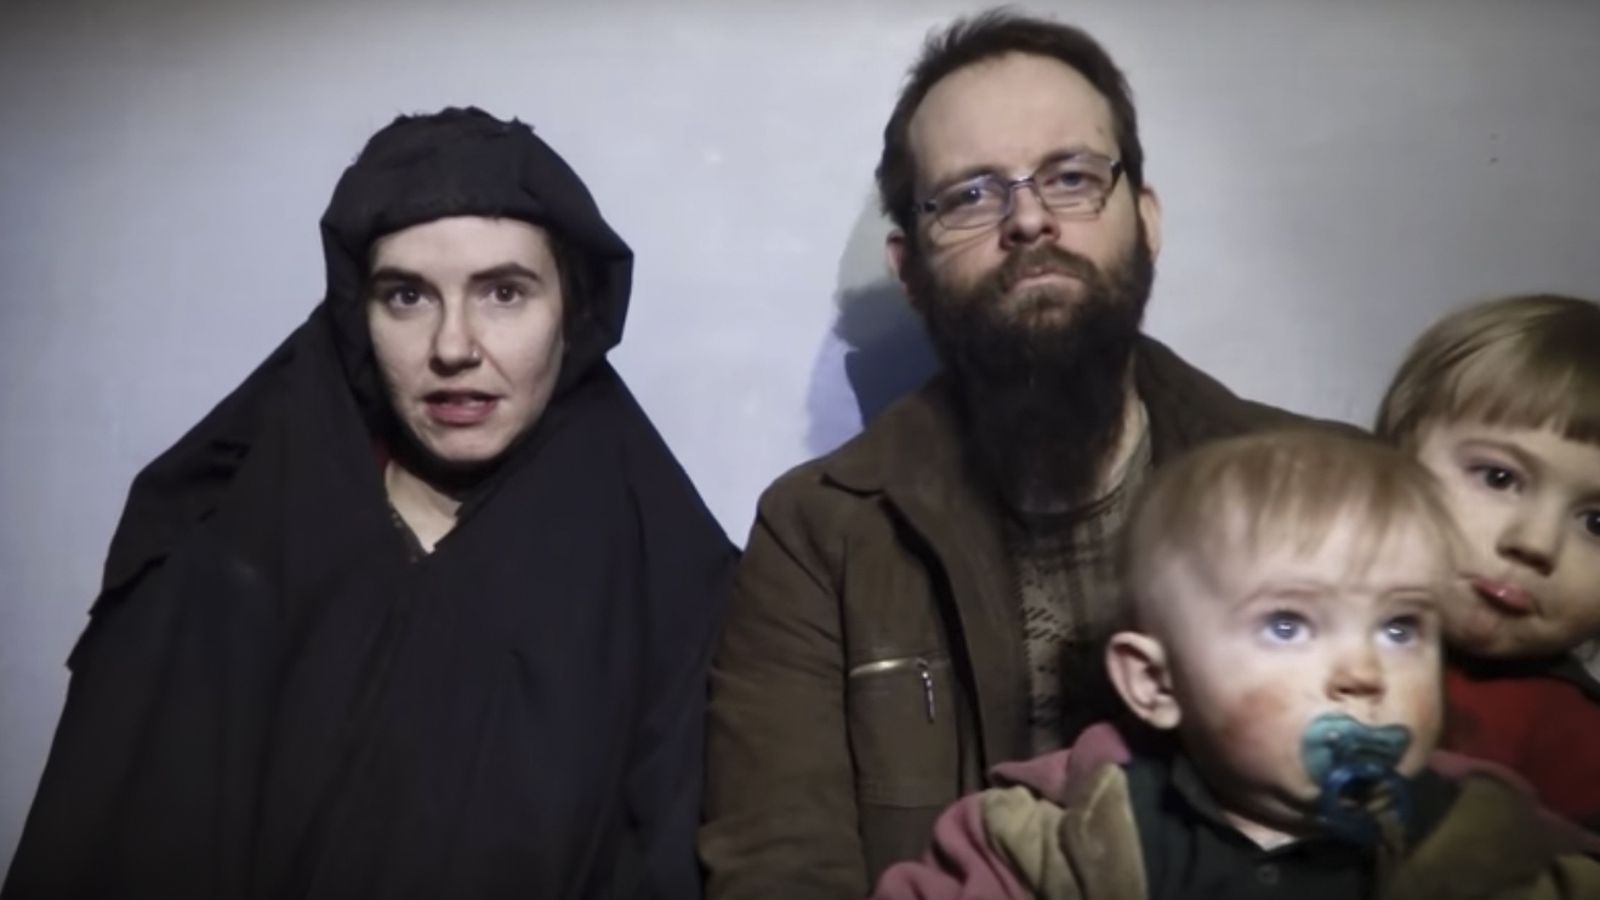 This American woman has given birth to 2 children while being held hostage  in Afghanistan. Why is the family still there? - Vox